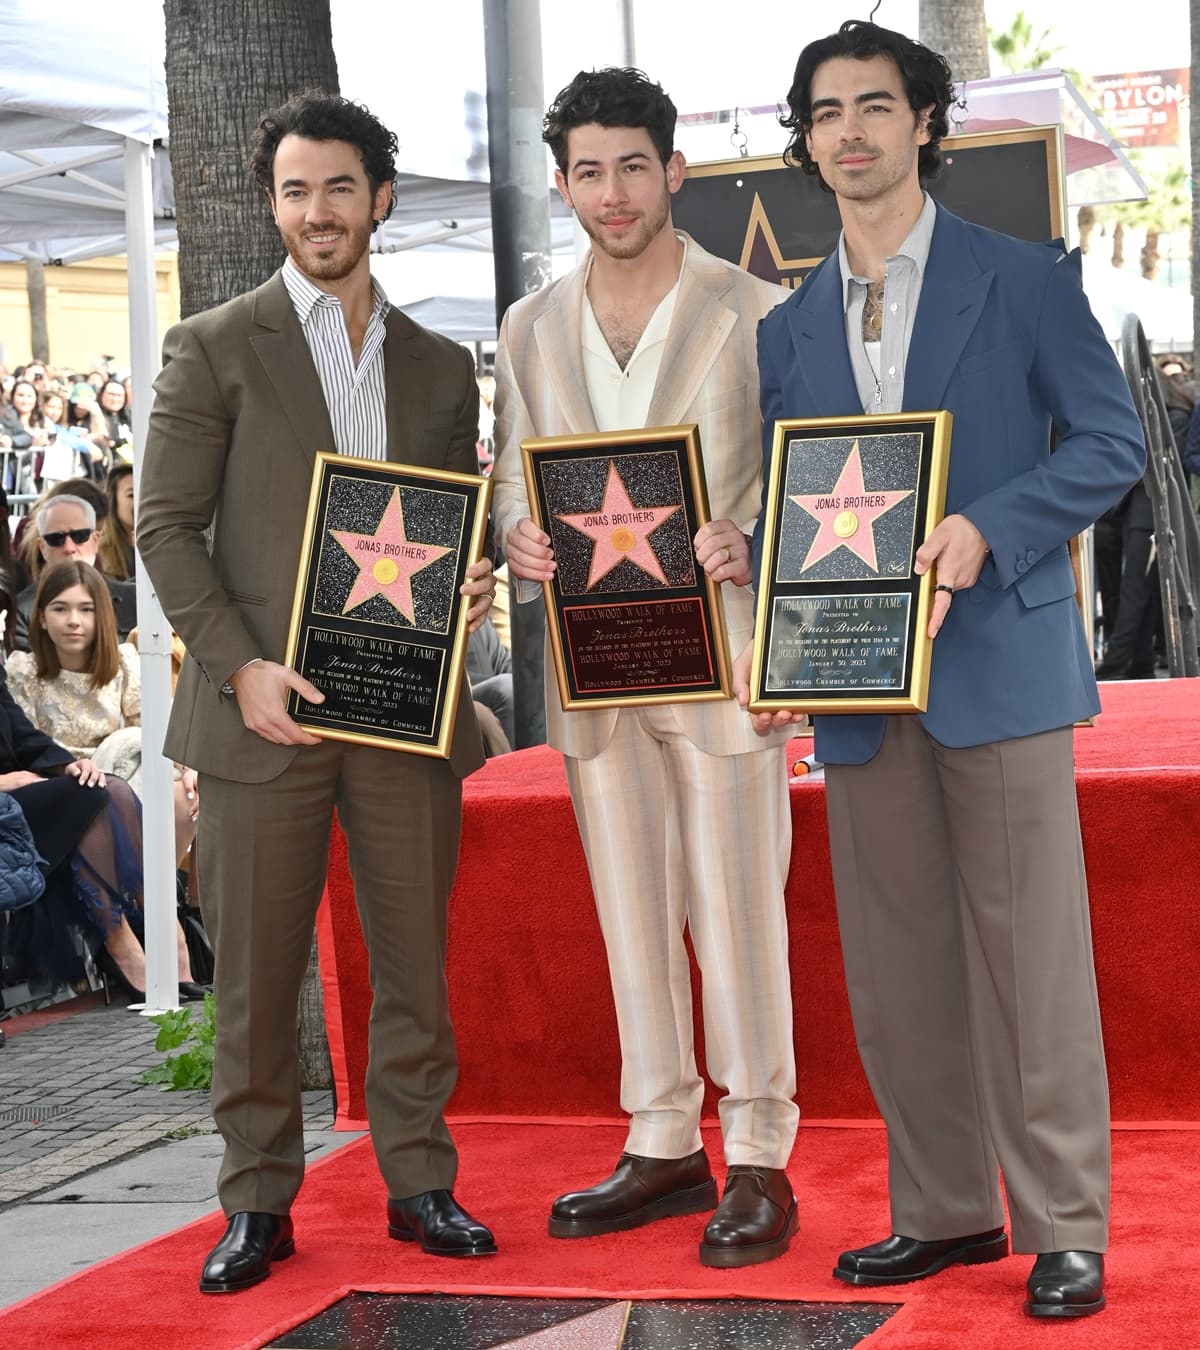 The Jonas Brothers' height varies among the siblings, with Kevin being the tallest at around 5'9", Joe standing at 5'7" and being shorter than his wife Sophie Turner, who is around 5'9", and the youngest member Nick being reportedly the shortest at about 5'6"